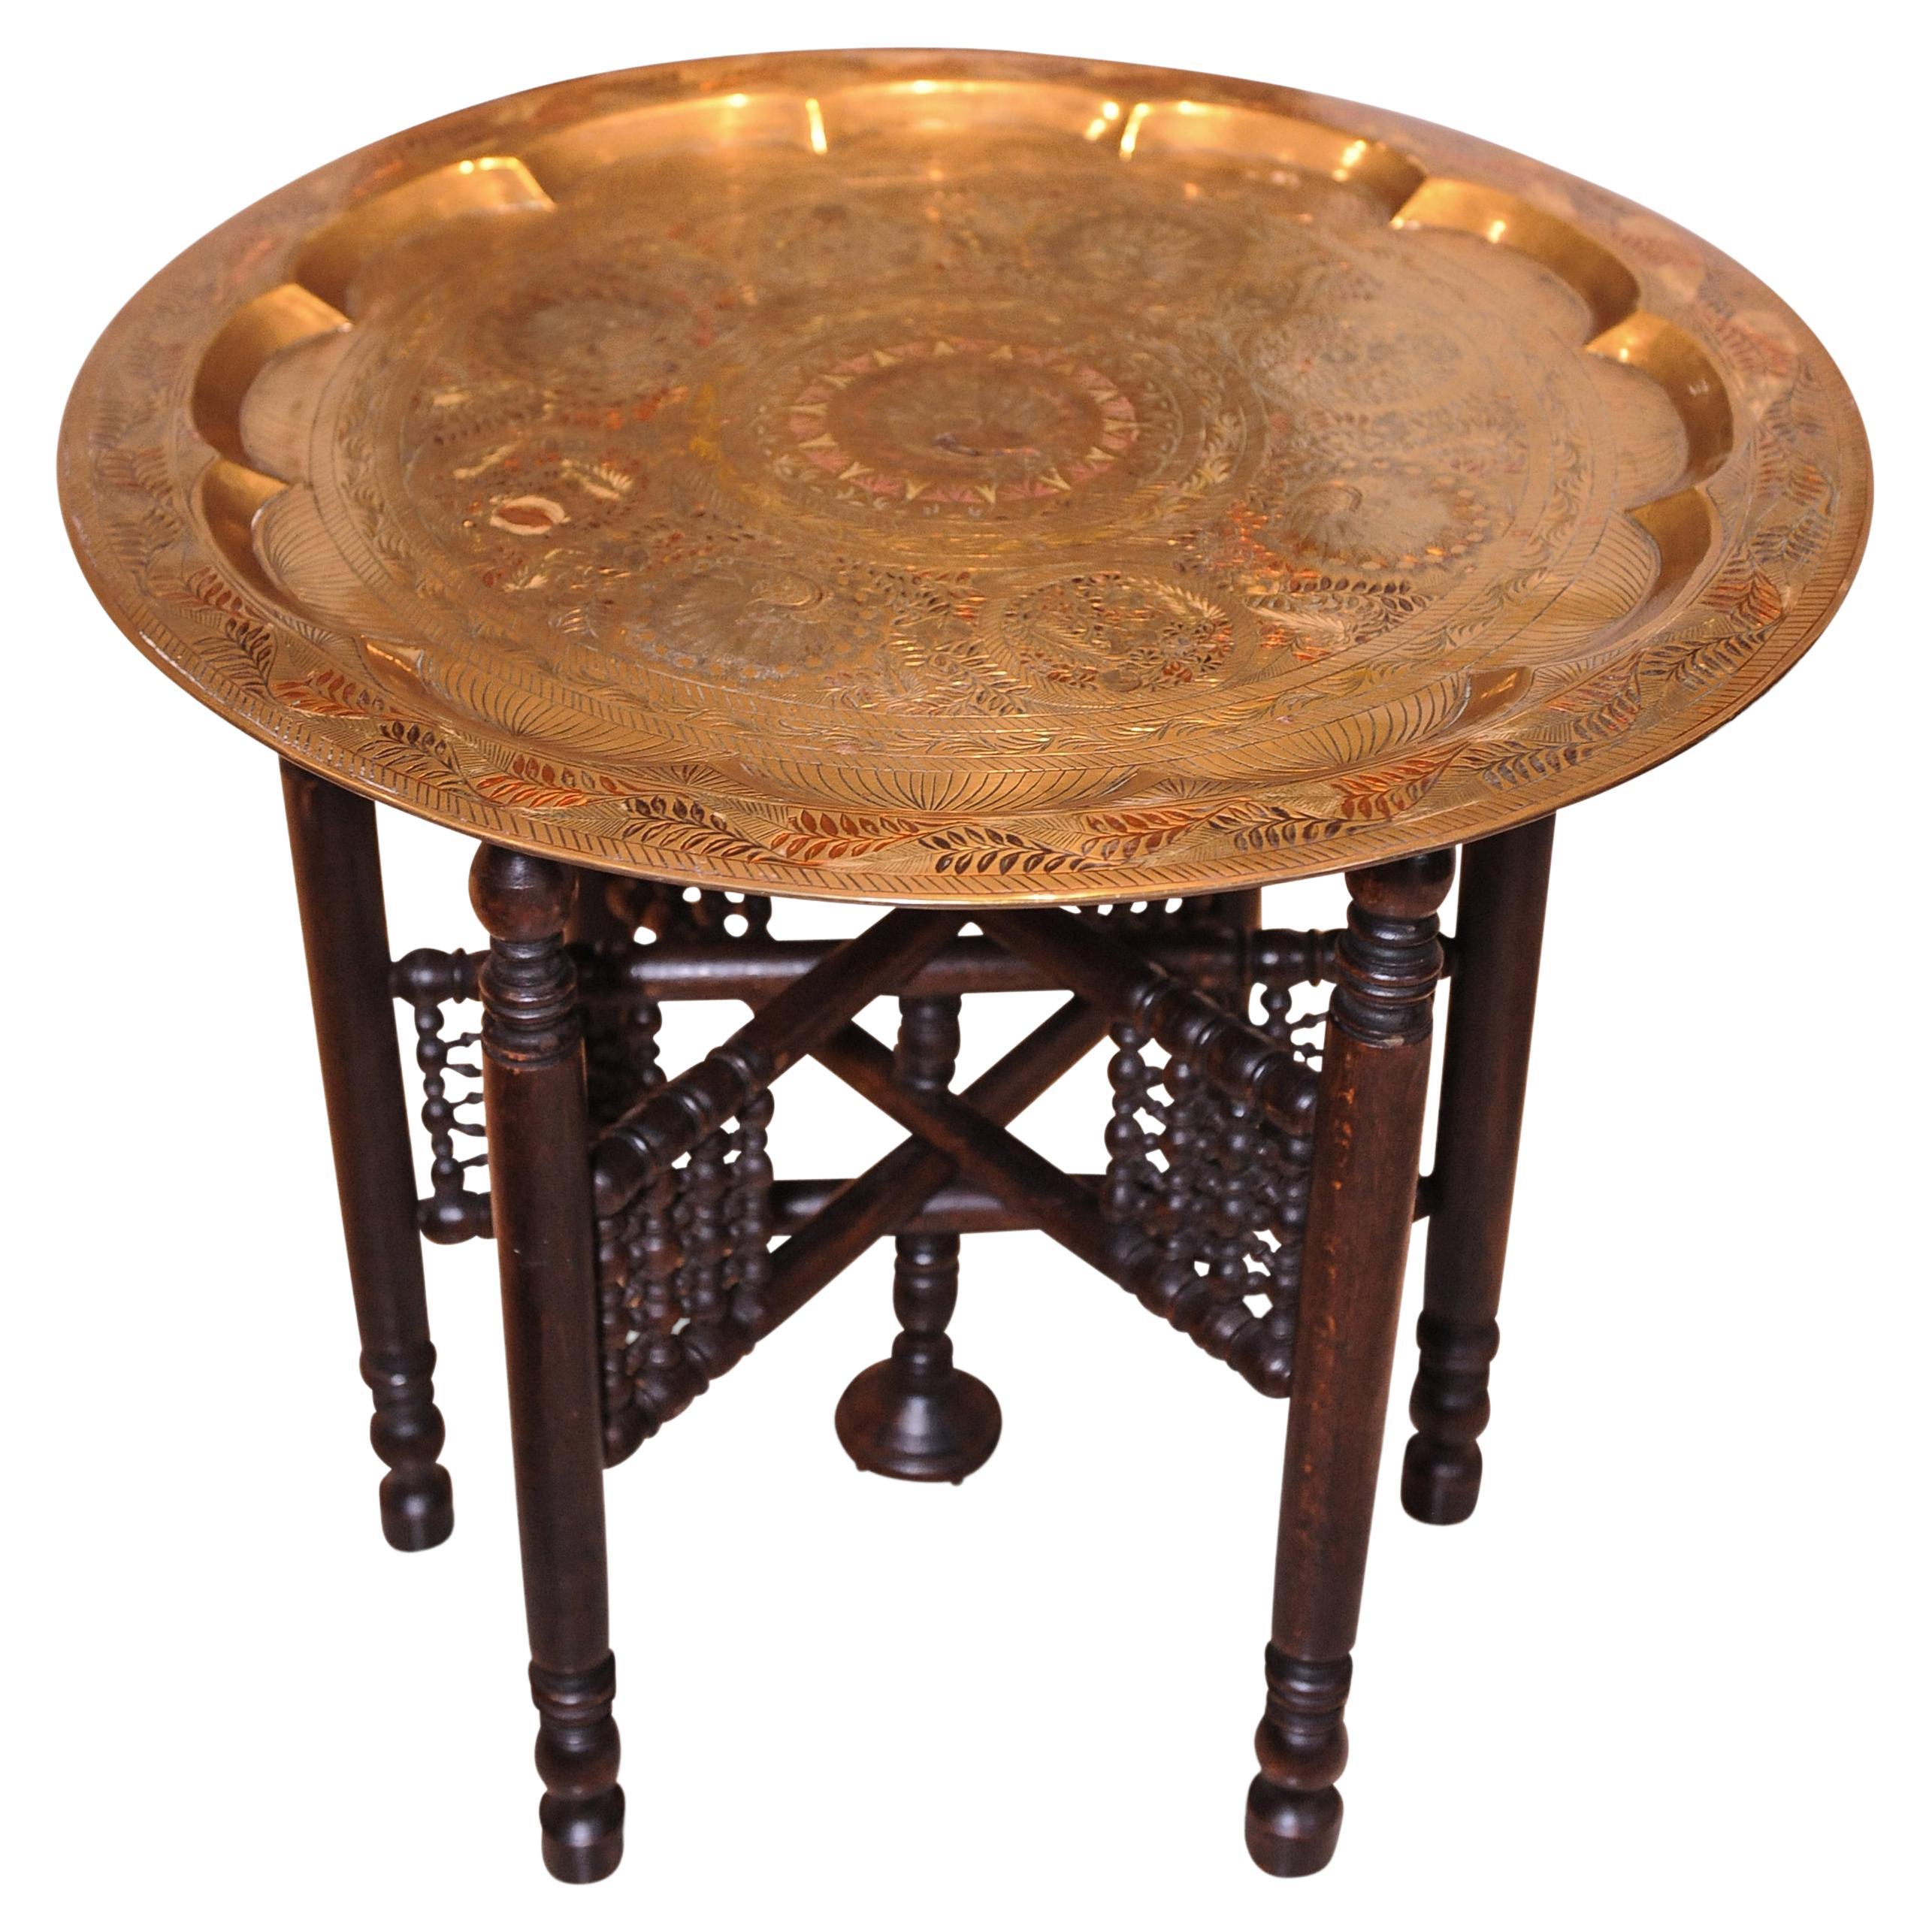 Middle Eastern Brass and Hardwood Table Decorated with Peacocks Early 1900's For Sale